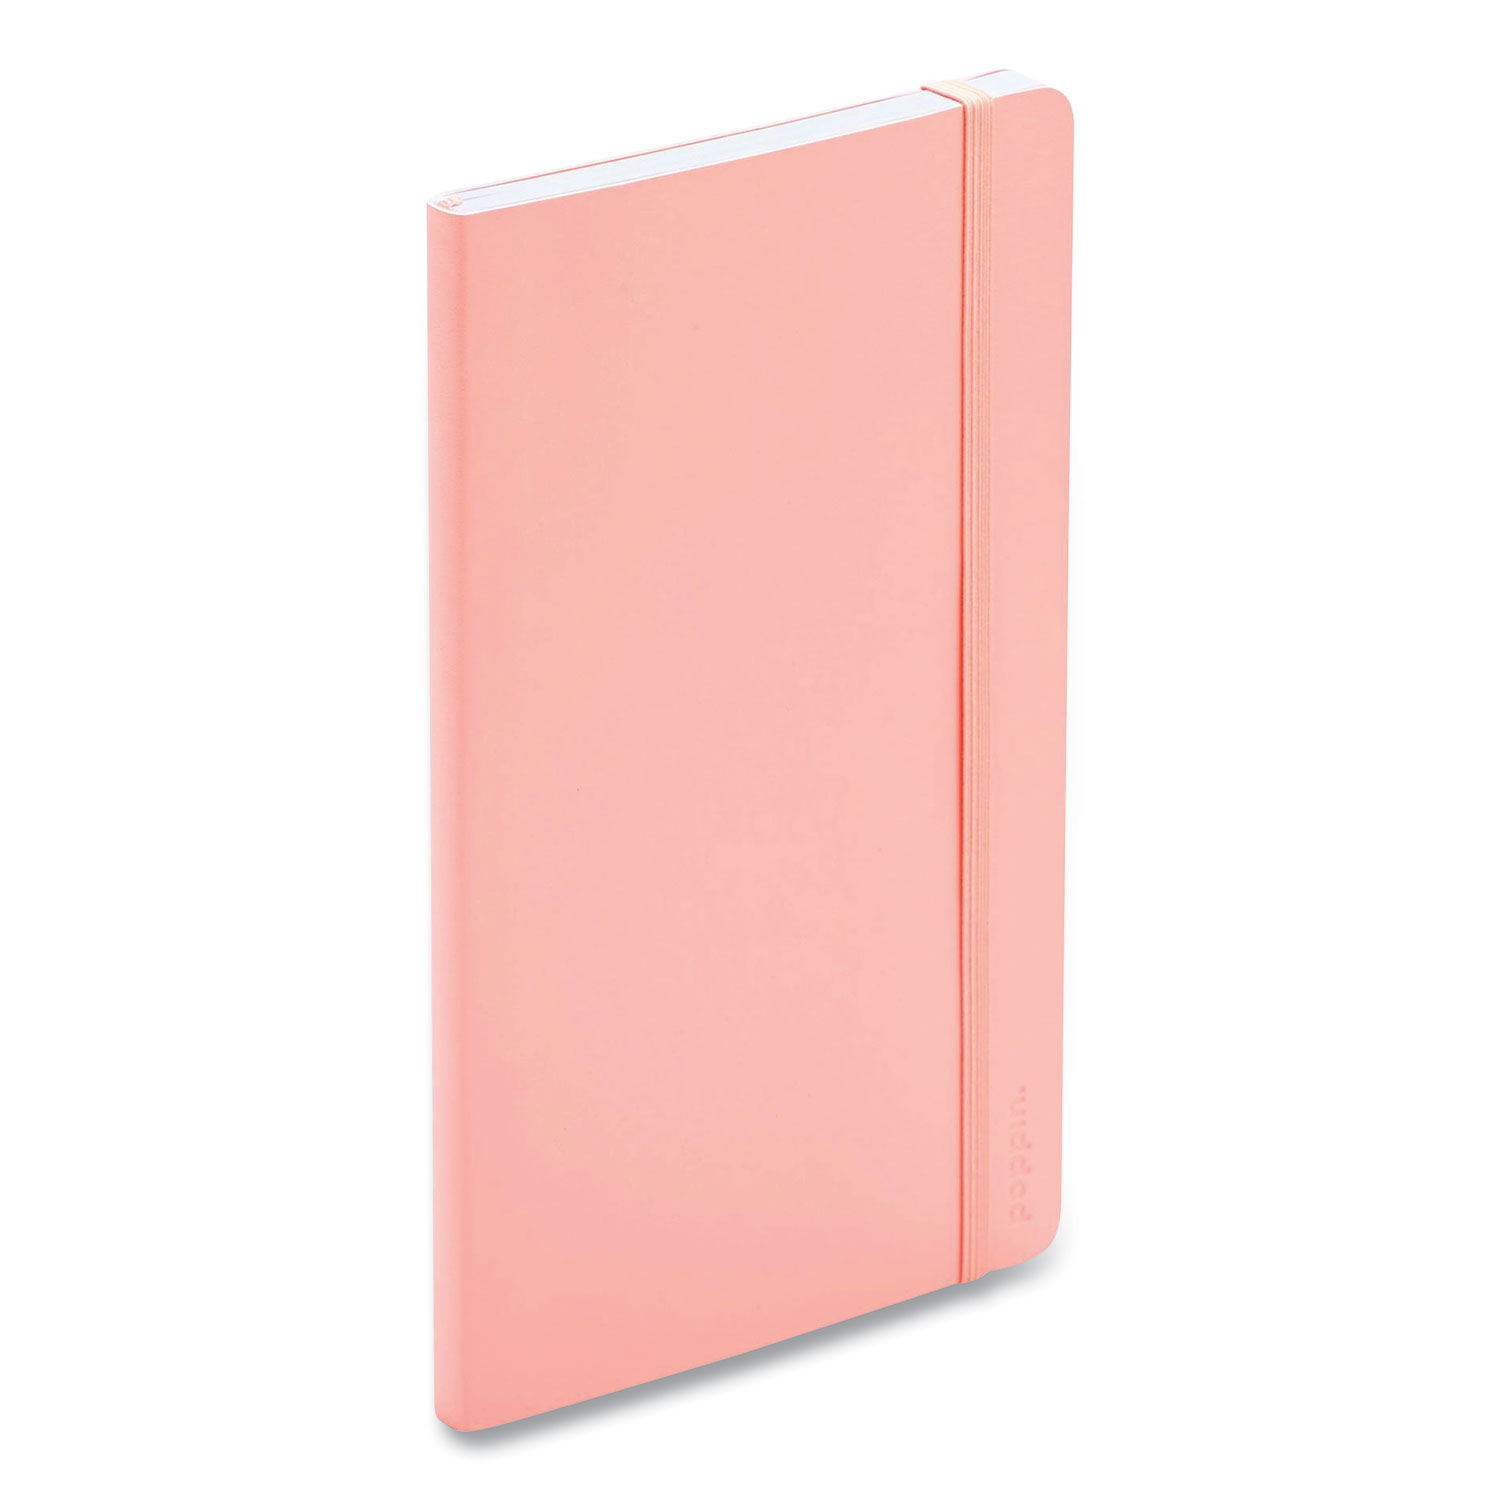  Poppin 104451 Medium Softcover Notebook, 8.25 x 5, Blush, 192 Sheets (PPJ2736729) 